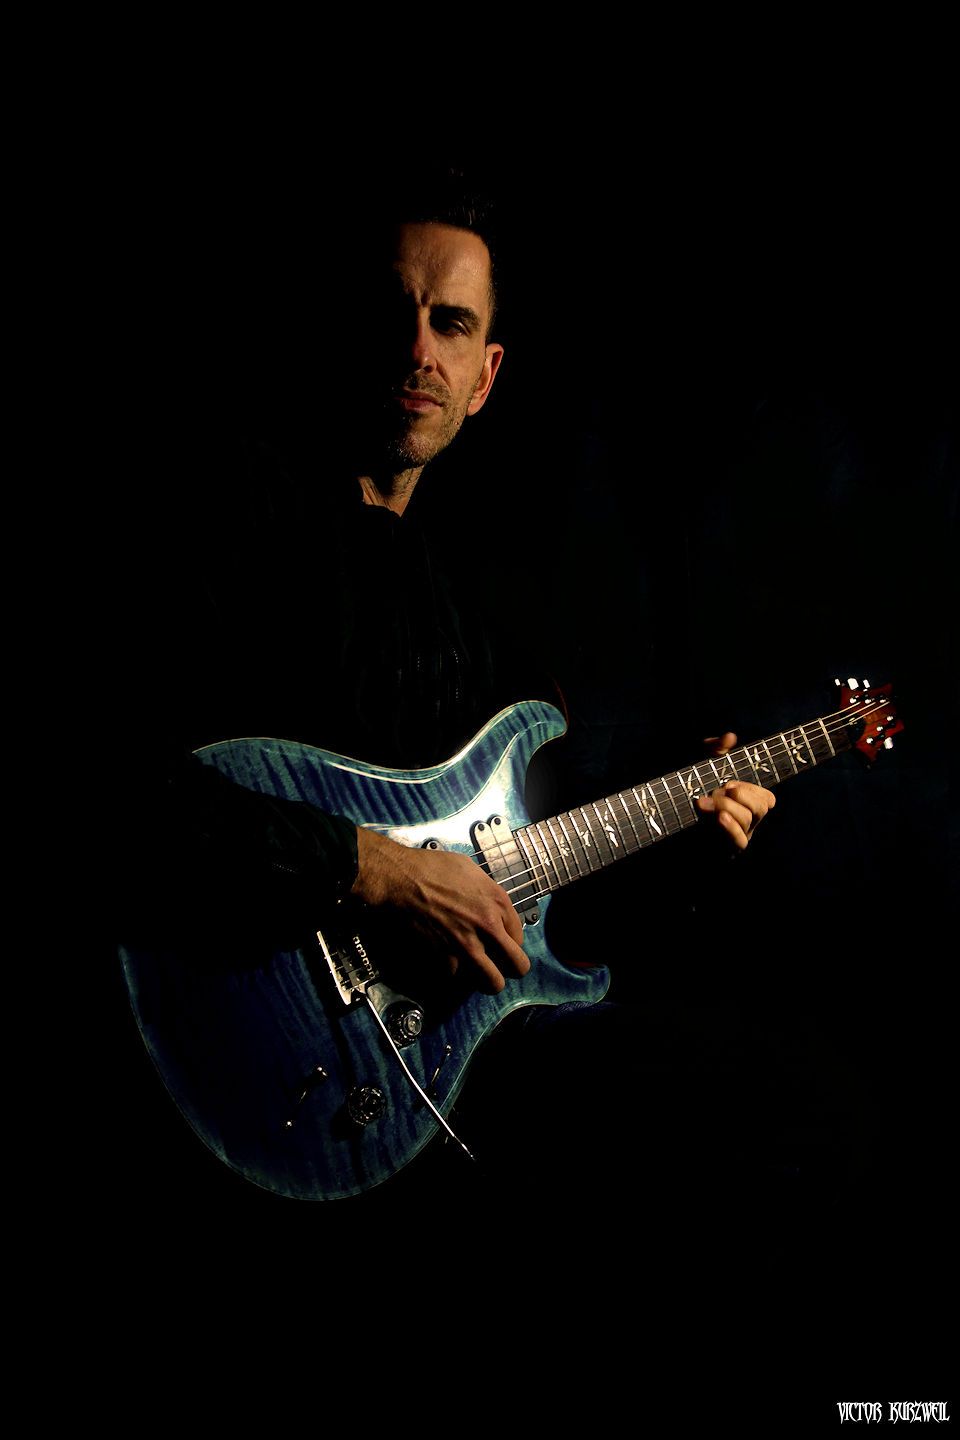 James Roberts with guitar on black back